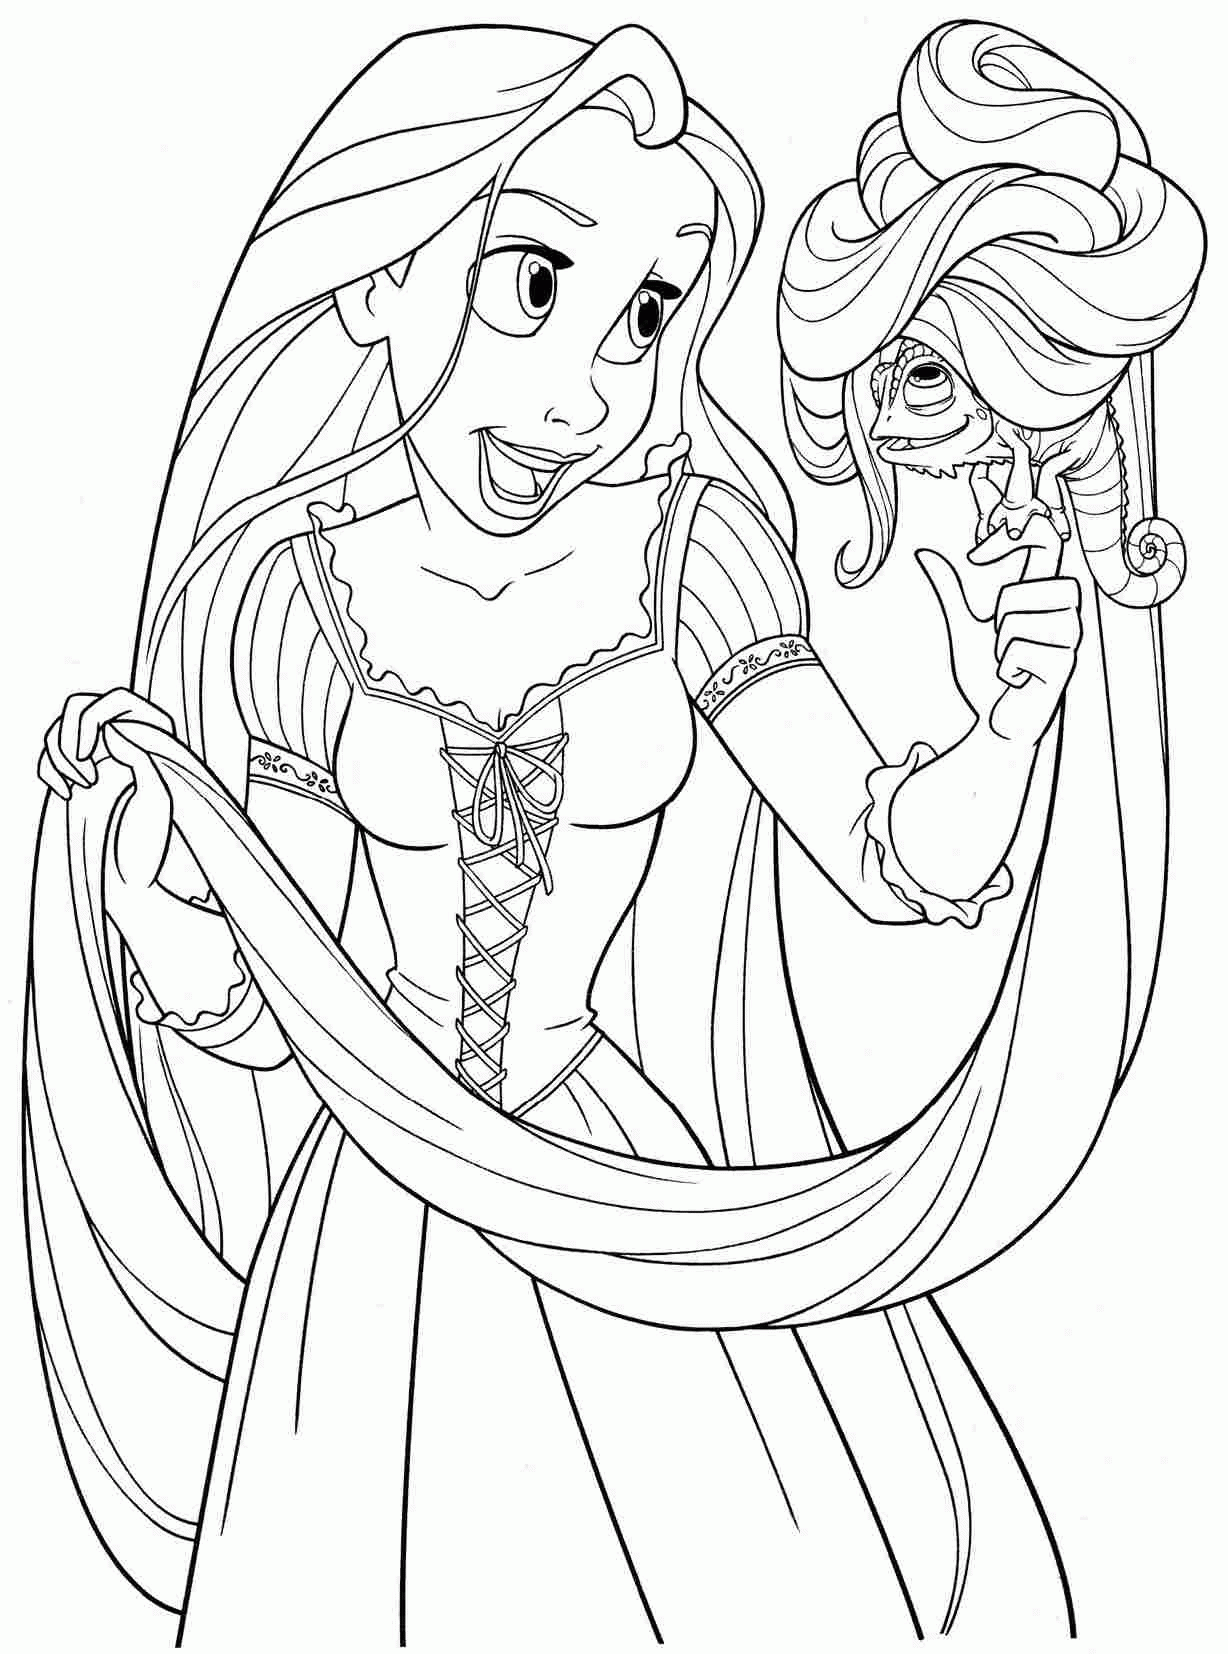 Papers Princess Coloring Pages Resume Format Download Pdf - Widetheme